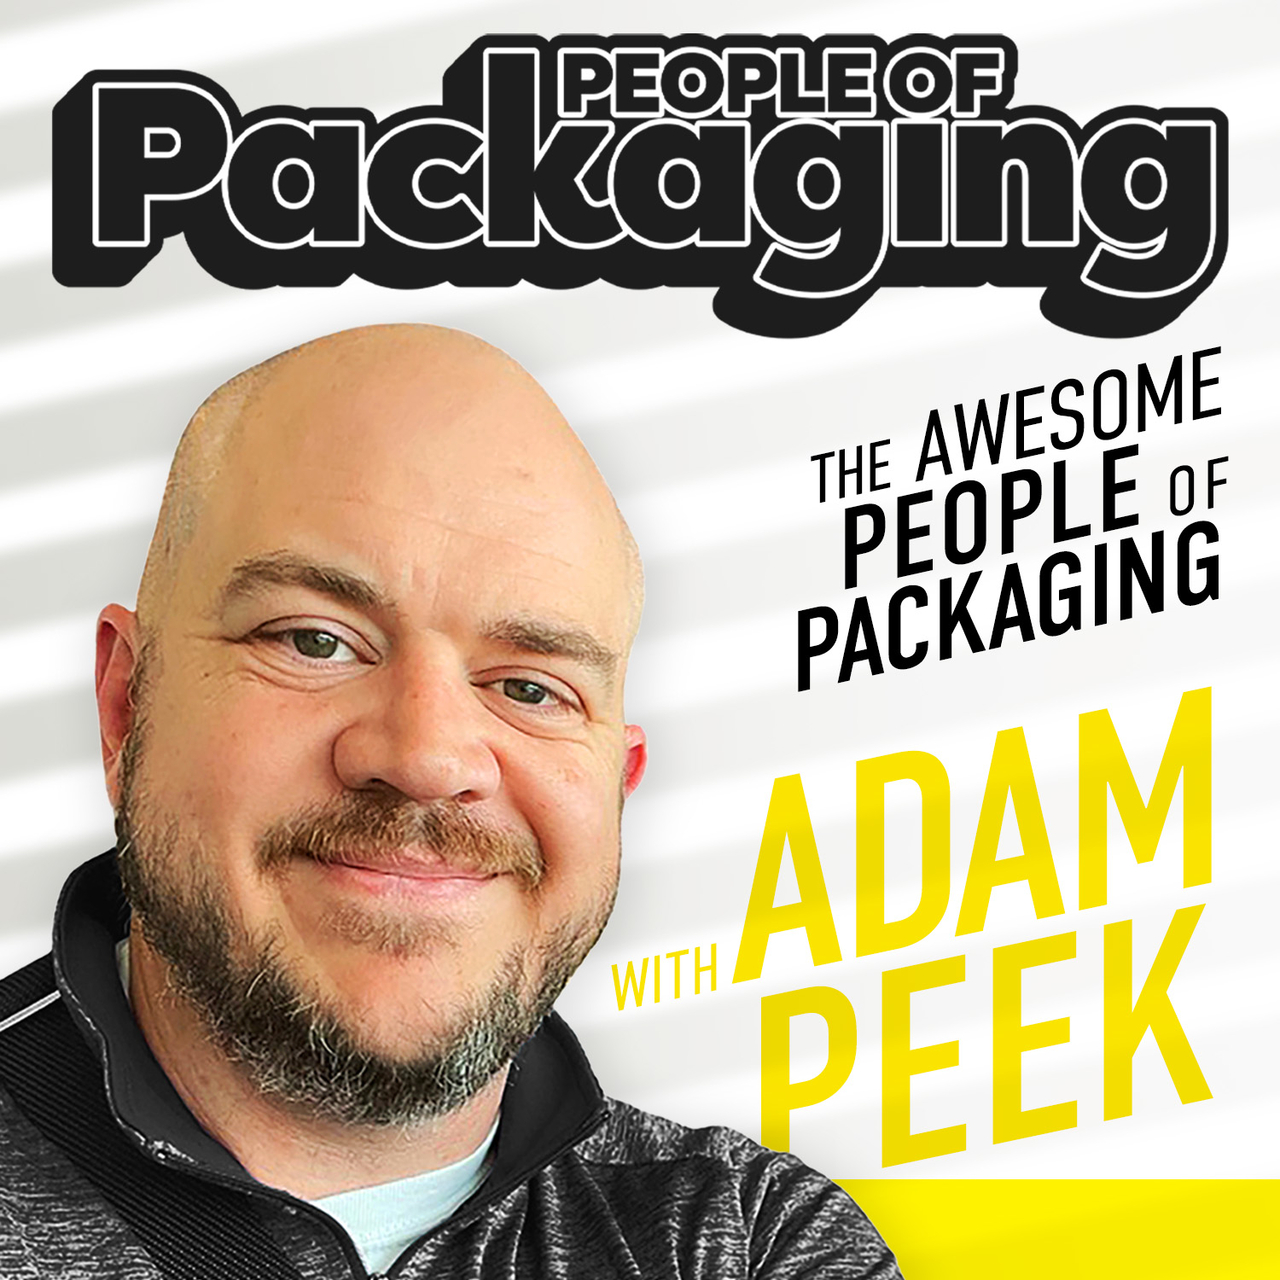 Packaging Is Awesome with Adam Peek